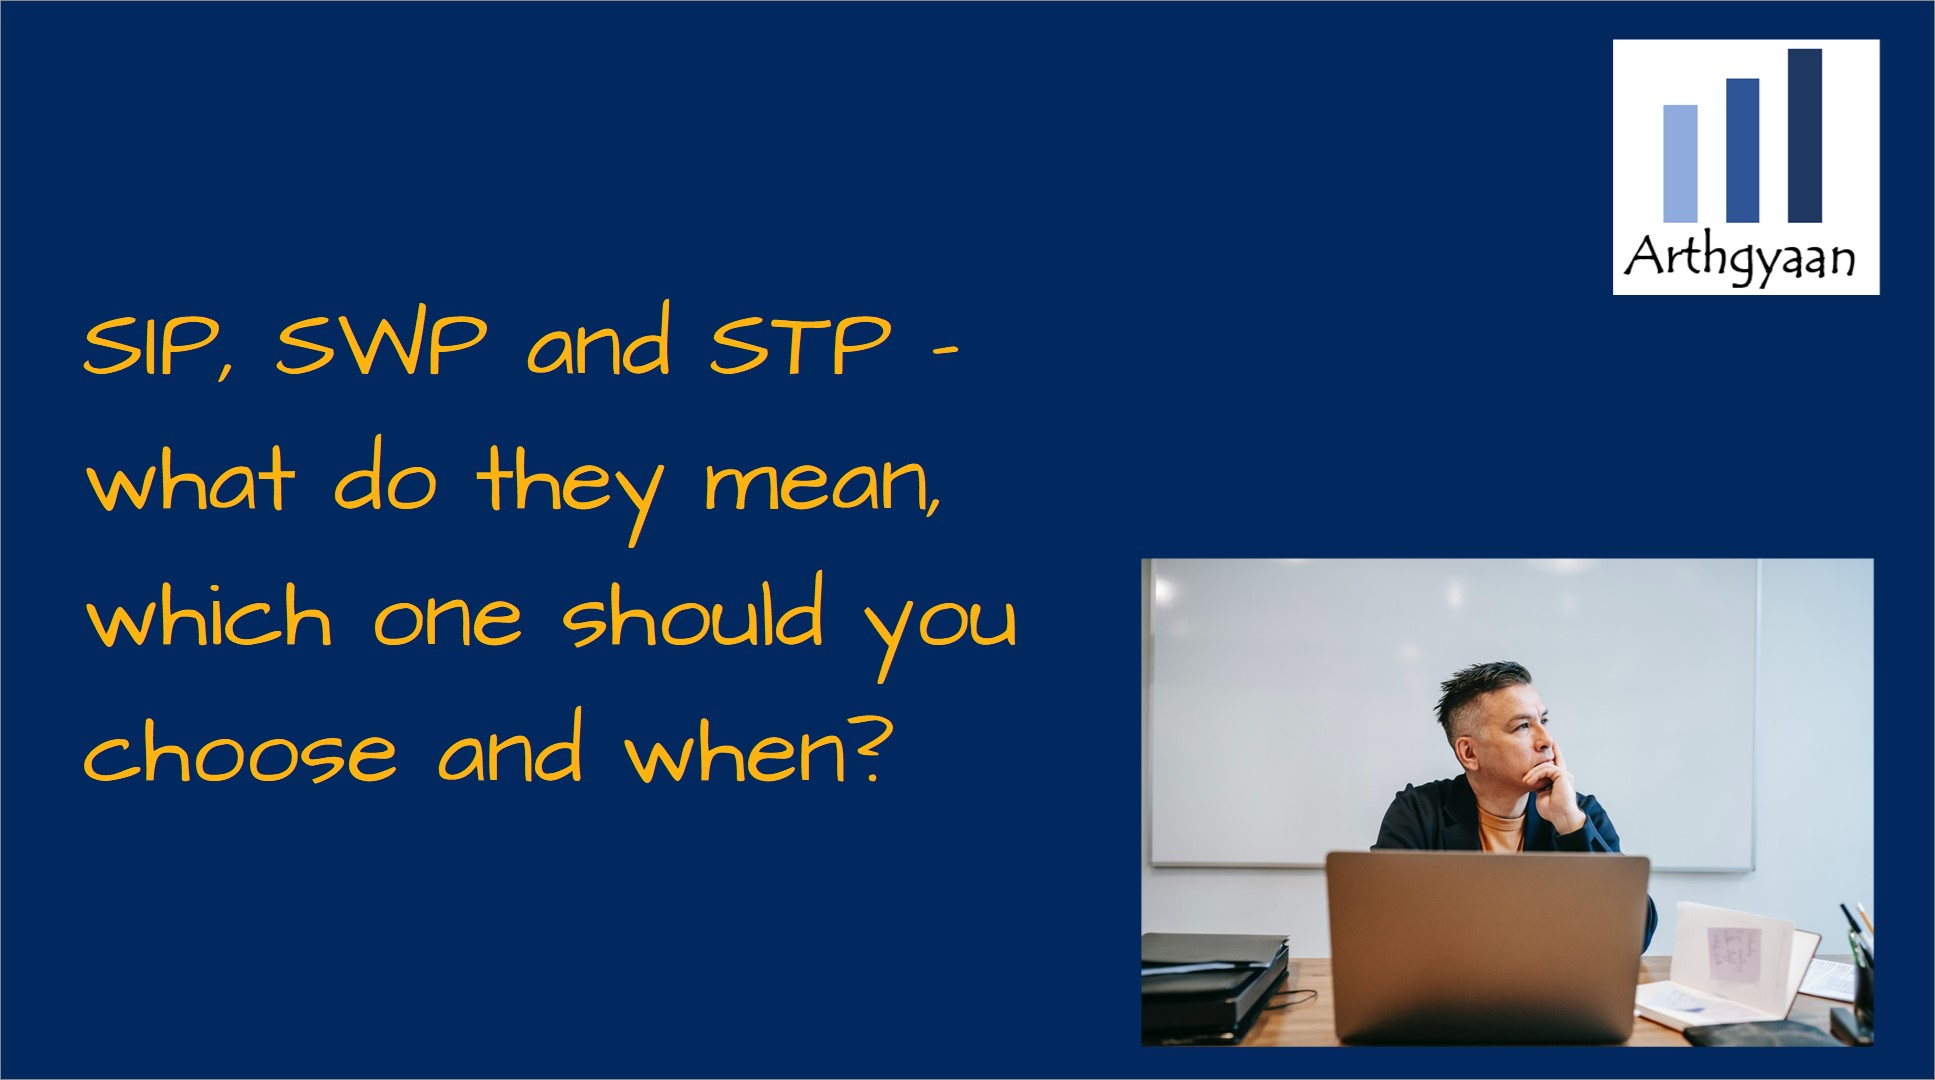 <p>This article demystifies some common jargons of investing in mutual funds by explaining SIP, SWP and STP along with examples of which one to use and when.</p>

